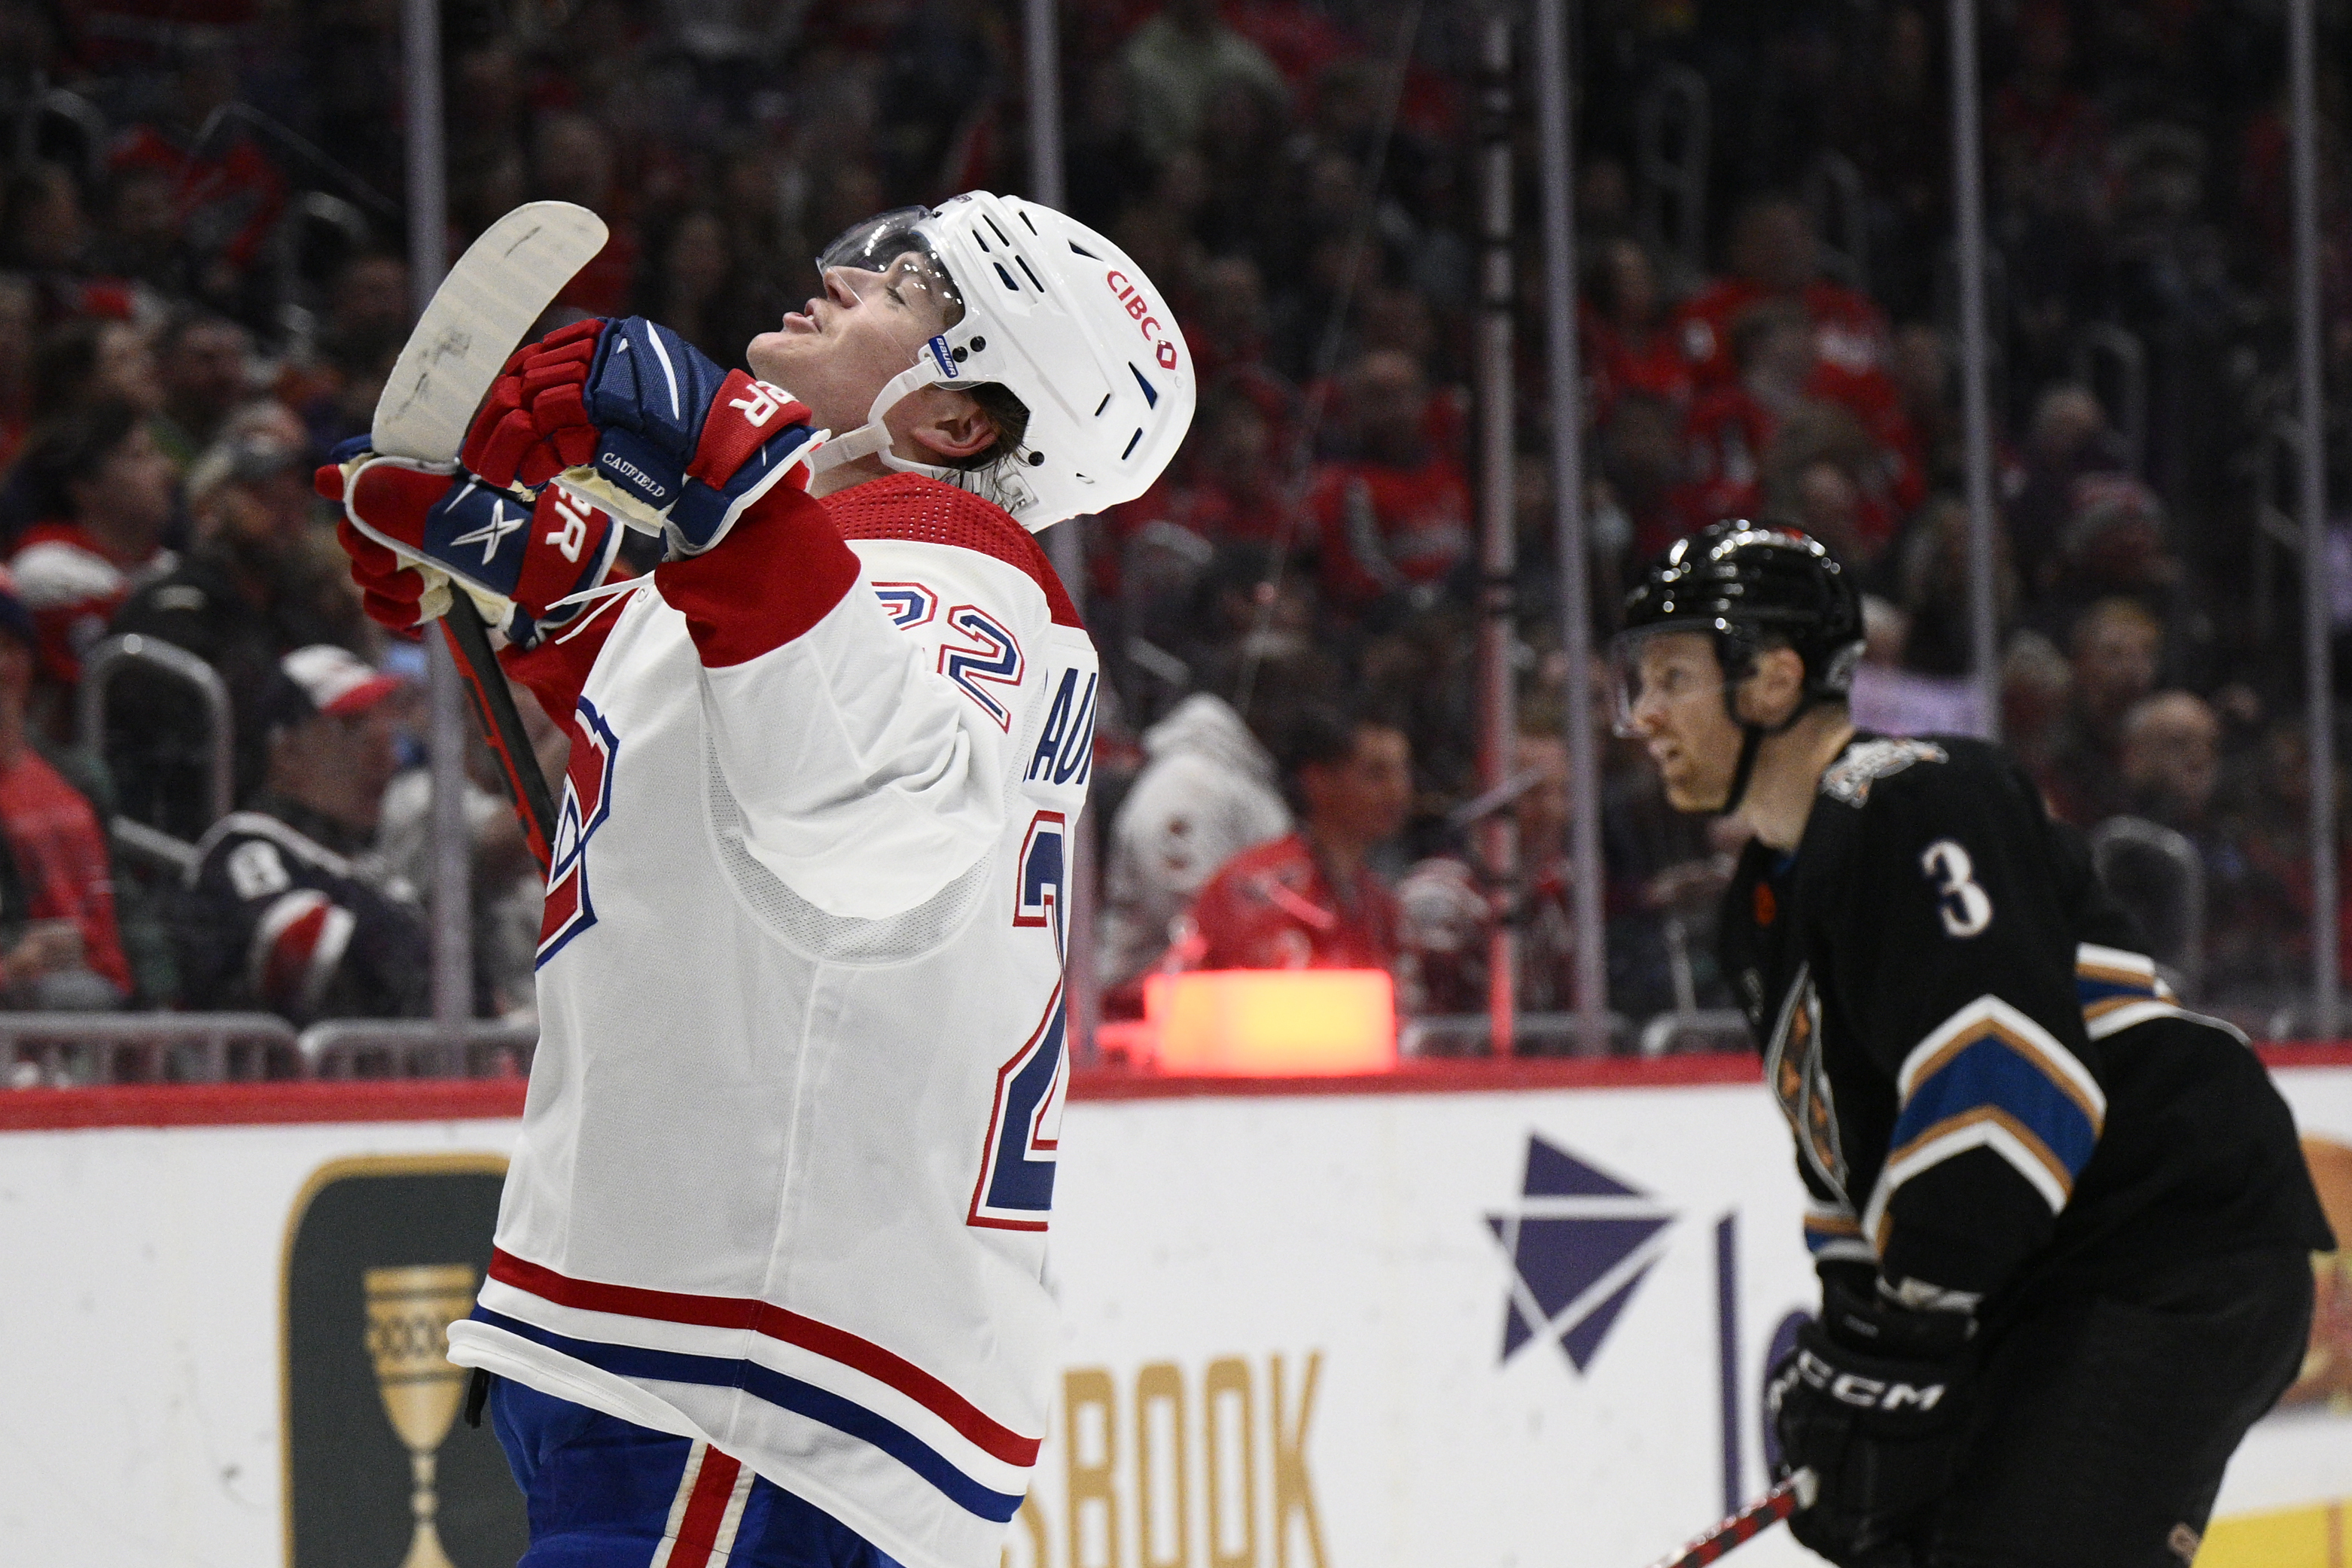 Canadiens' Kirby Dach displays offensive progress in win over Rangers